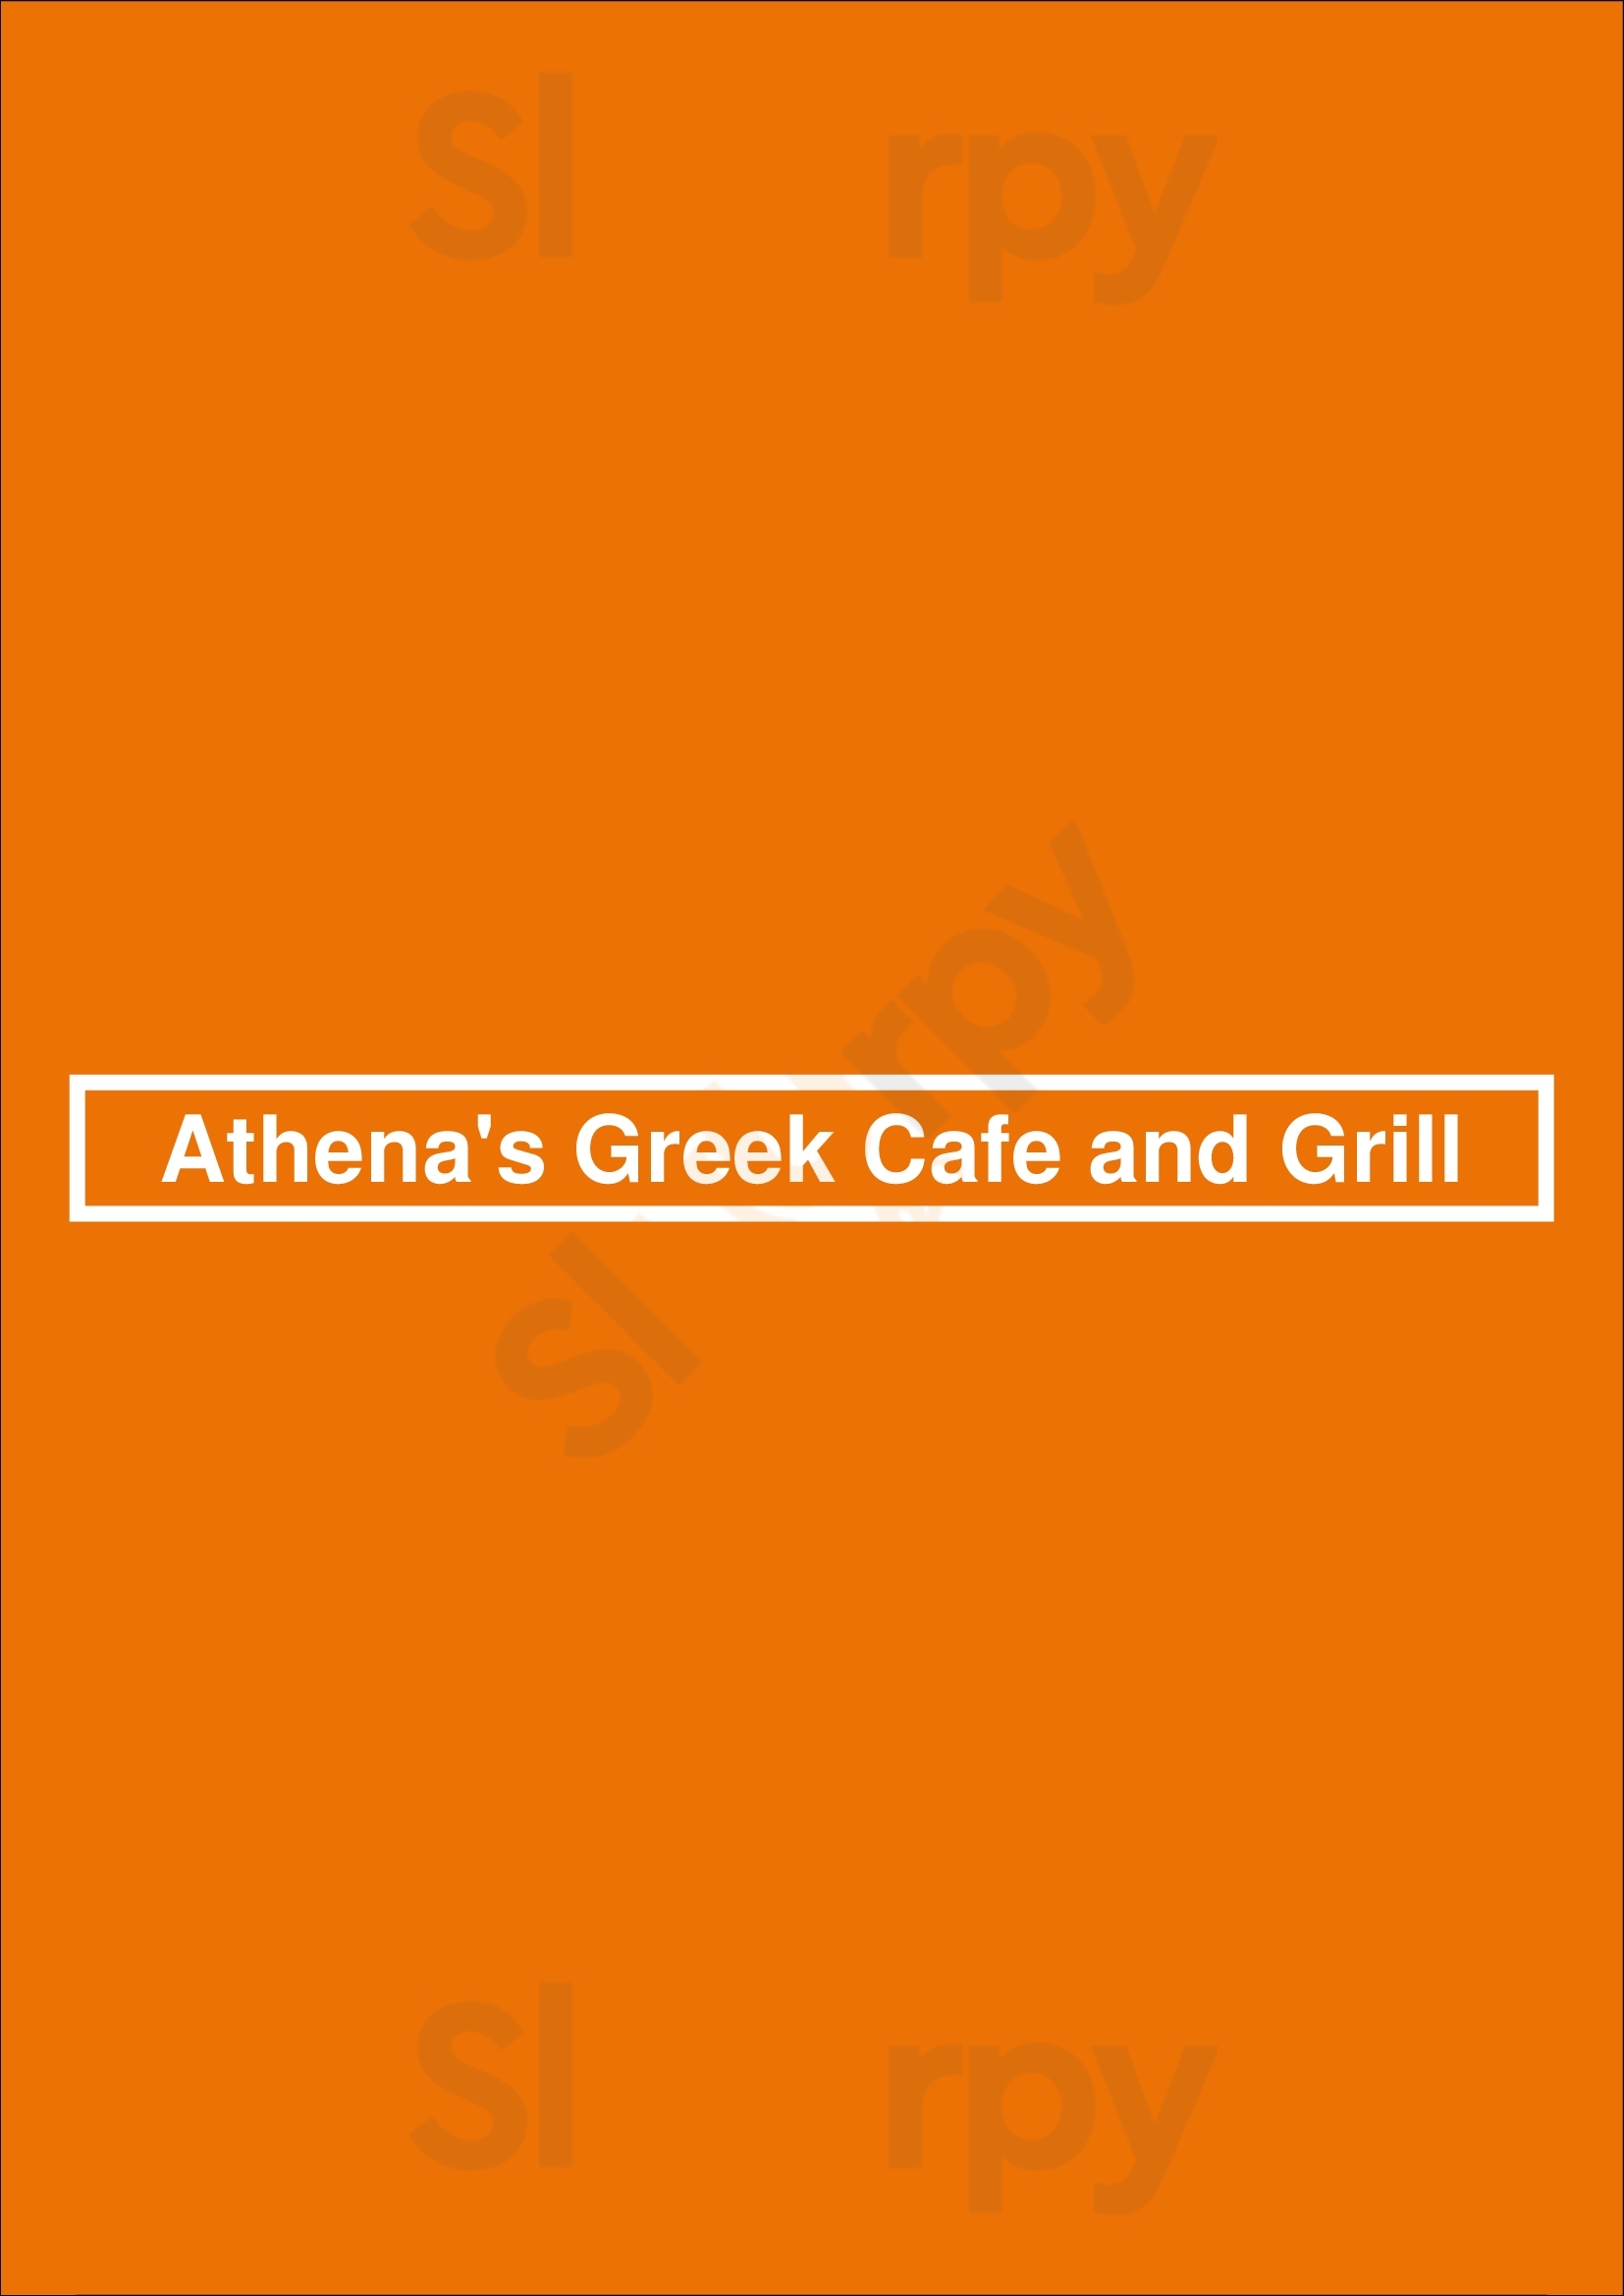 Athena's Greek Cafe And Grill Bakersfield Menu - 1